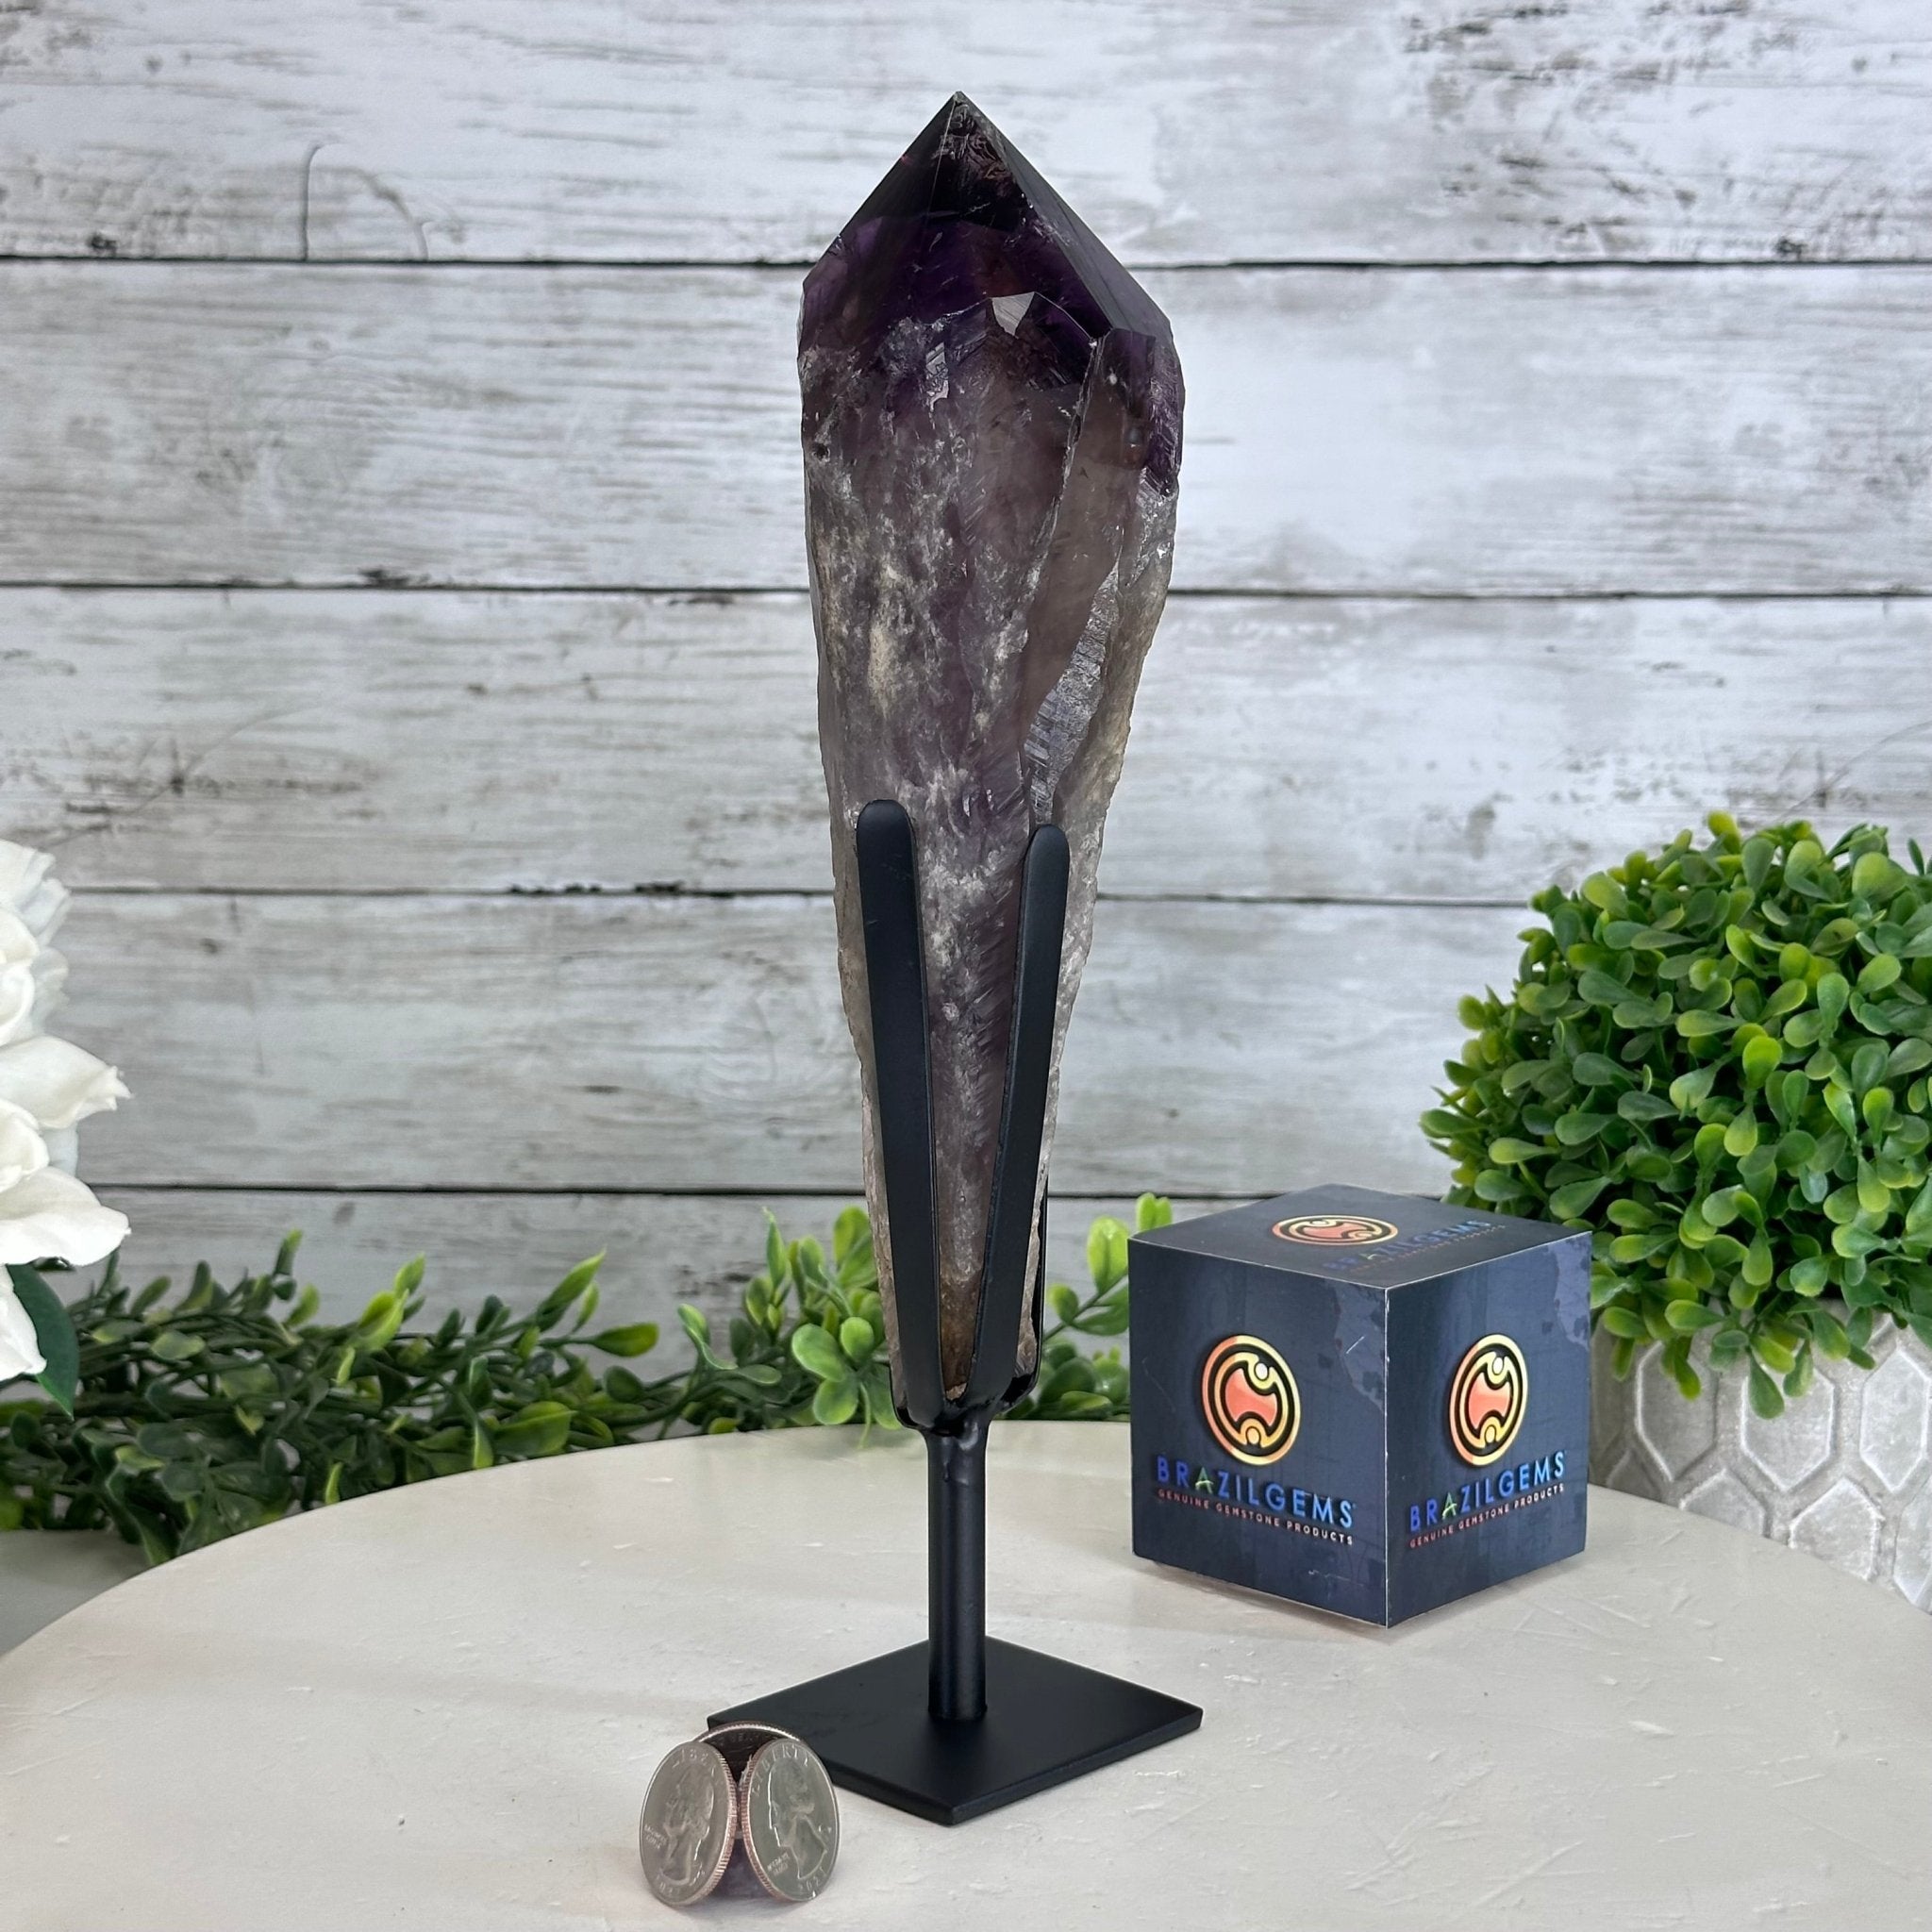 Super Quality Amethyst Wand on a Metal Stand, 1.9 lbs & 10.8" Tall #3123AM-005 - Brazil GemsBrazil GemsSuper Quality Amethyst Wand on a Metal Stand, 1.9 lbs & 10.8" Tall #3123AM-005Clusters on Fixed Bases3123AM-005